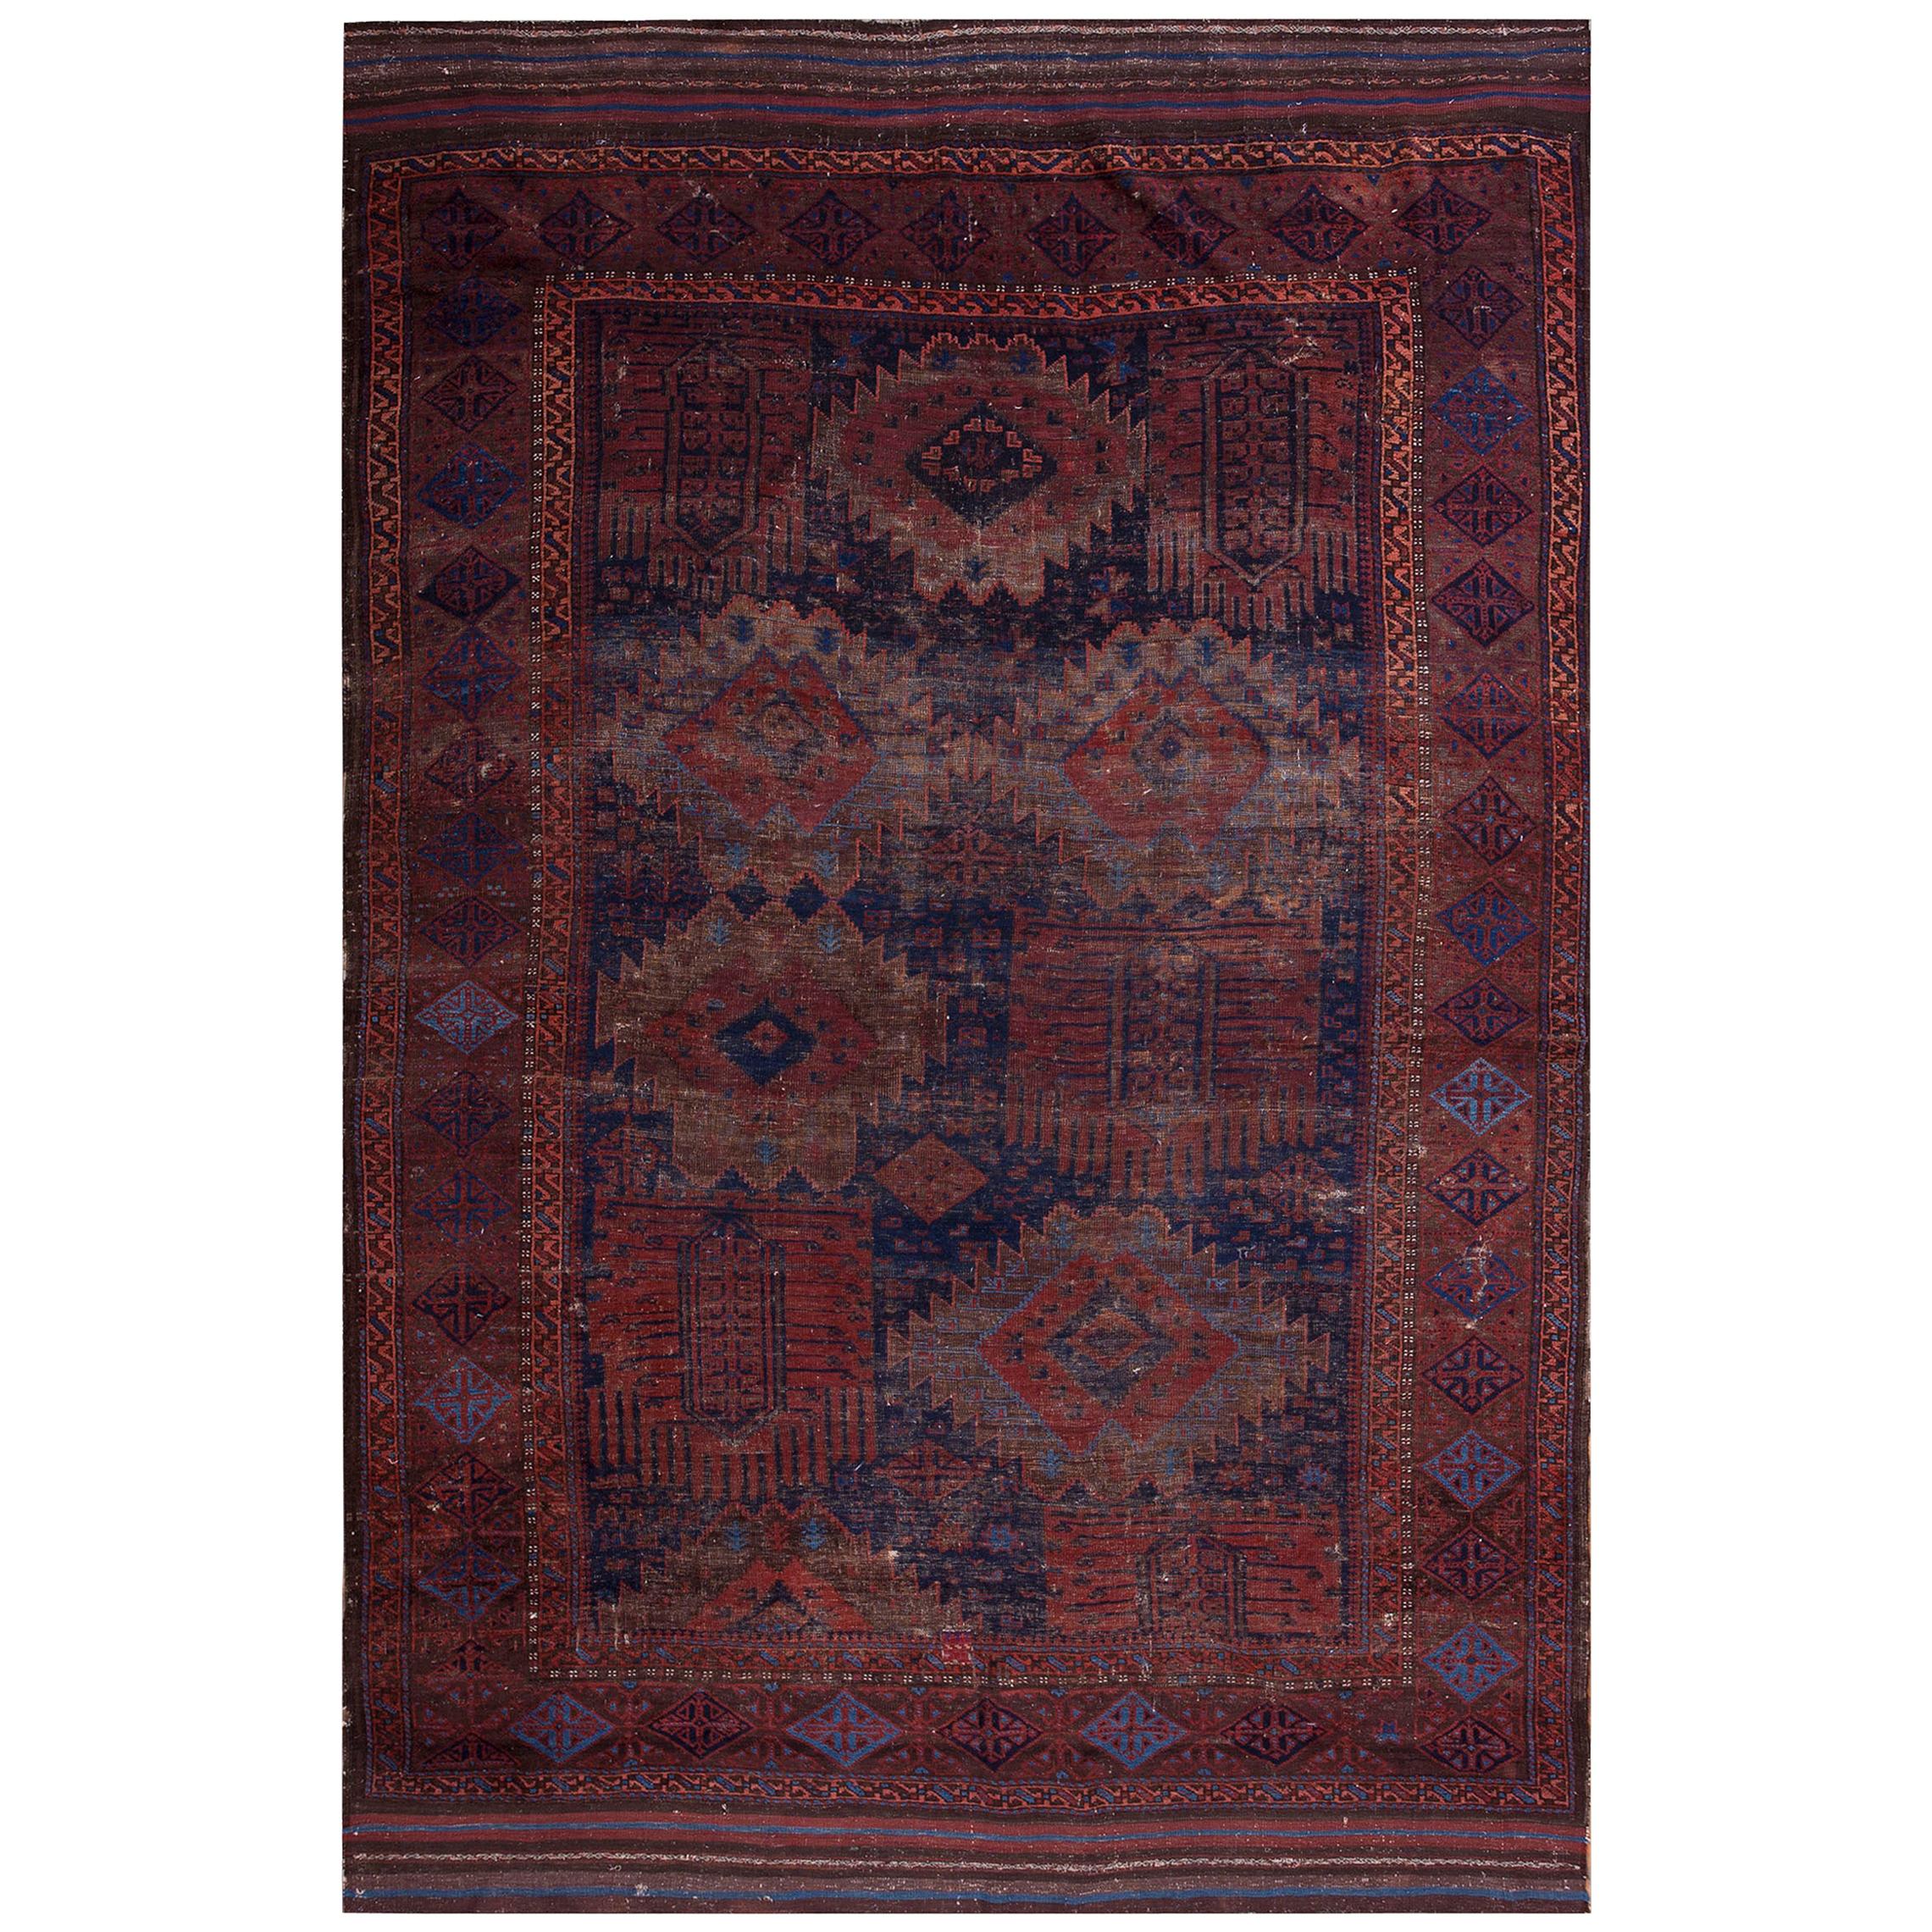 19th Century Persian Baluch Carpet ( 6'2" x 10'2" - 188 x 310 ) For Sale